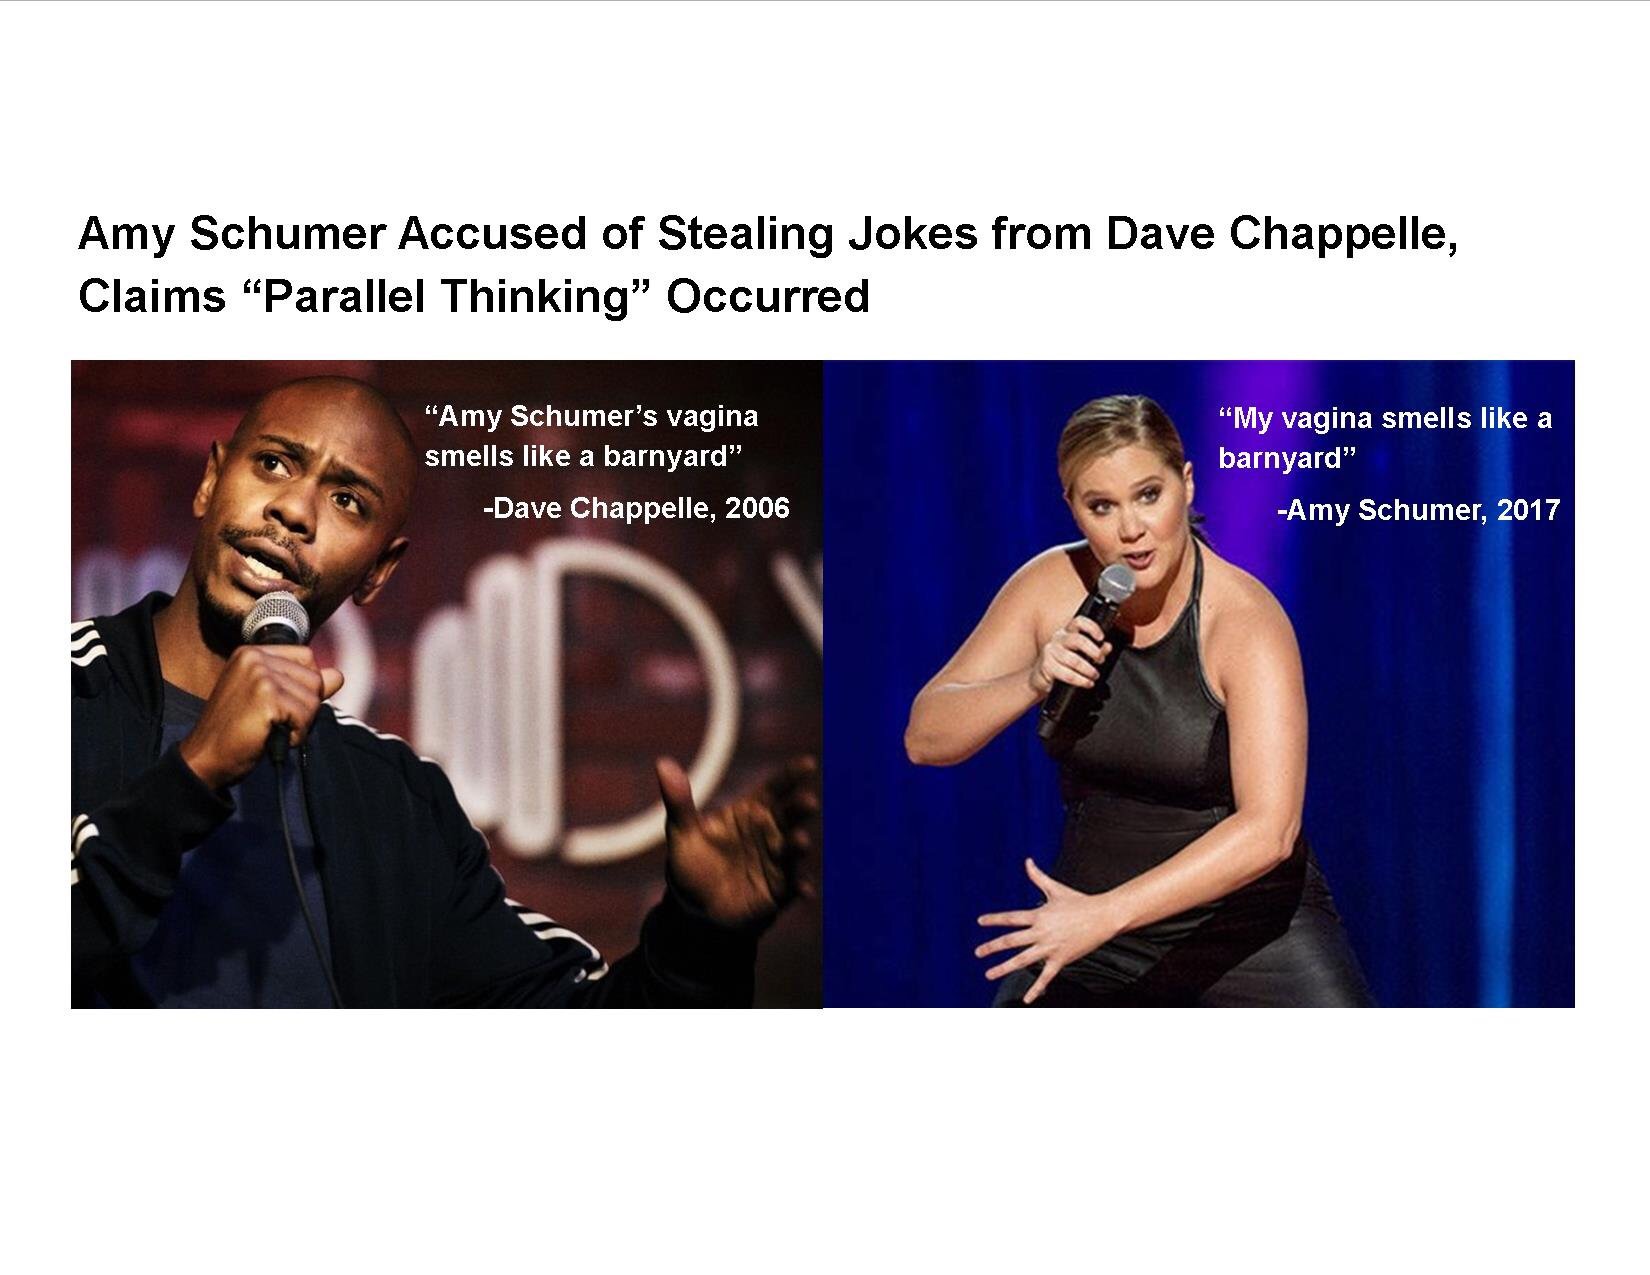 memes  - amy schumer stealing jokes meme - Amy Schumer Accused of Stealing Jokes from Dave Chappelle, Claims "Parallel Thinking" Occurred "Amy Schumer's vagina smells a barnyard" Dave Chappelle, 2006 "My vagina smells a barnyard" Amy Schumer, 2017